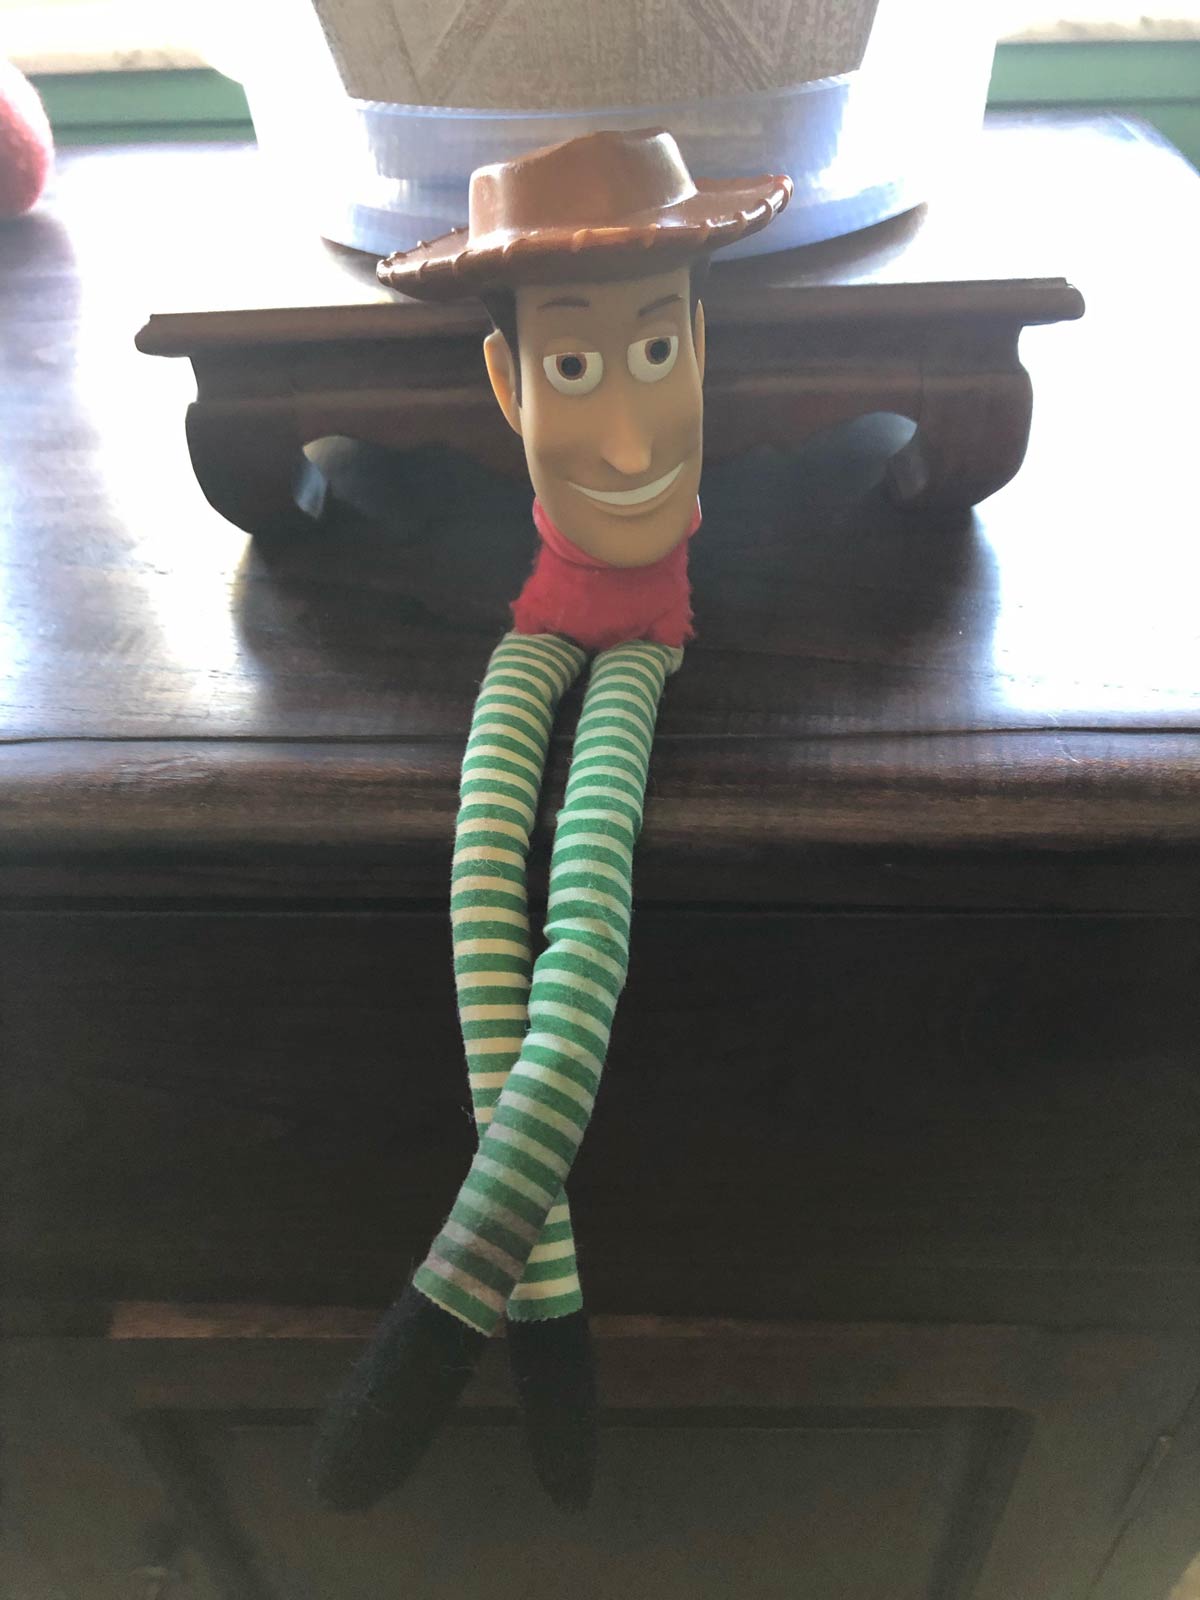 My dad never wanted to spend the money on a new toy after my Woody doll broke as a young child. I present this cursed creation that I spent an unholy amount of time with